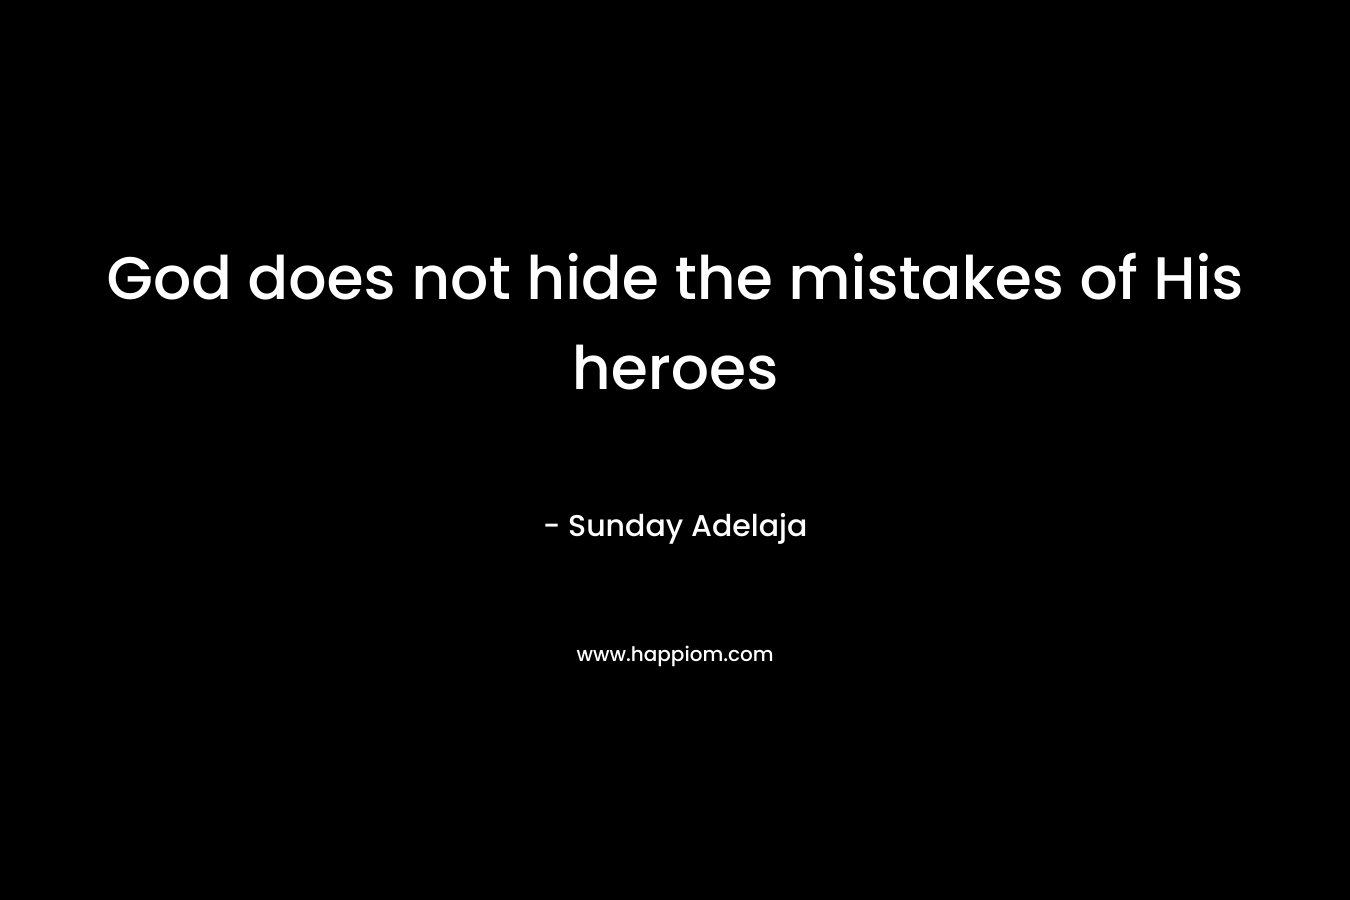 God does not hide the mistakes of His heroes